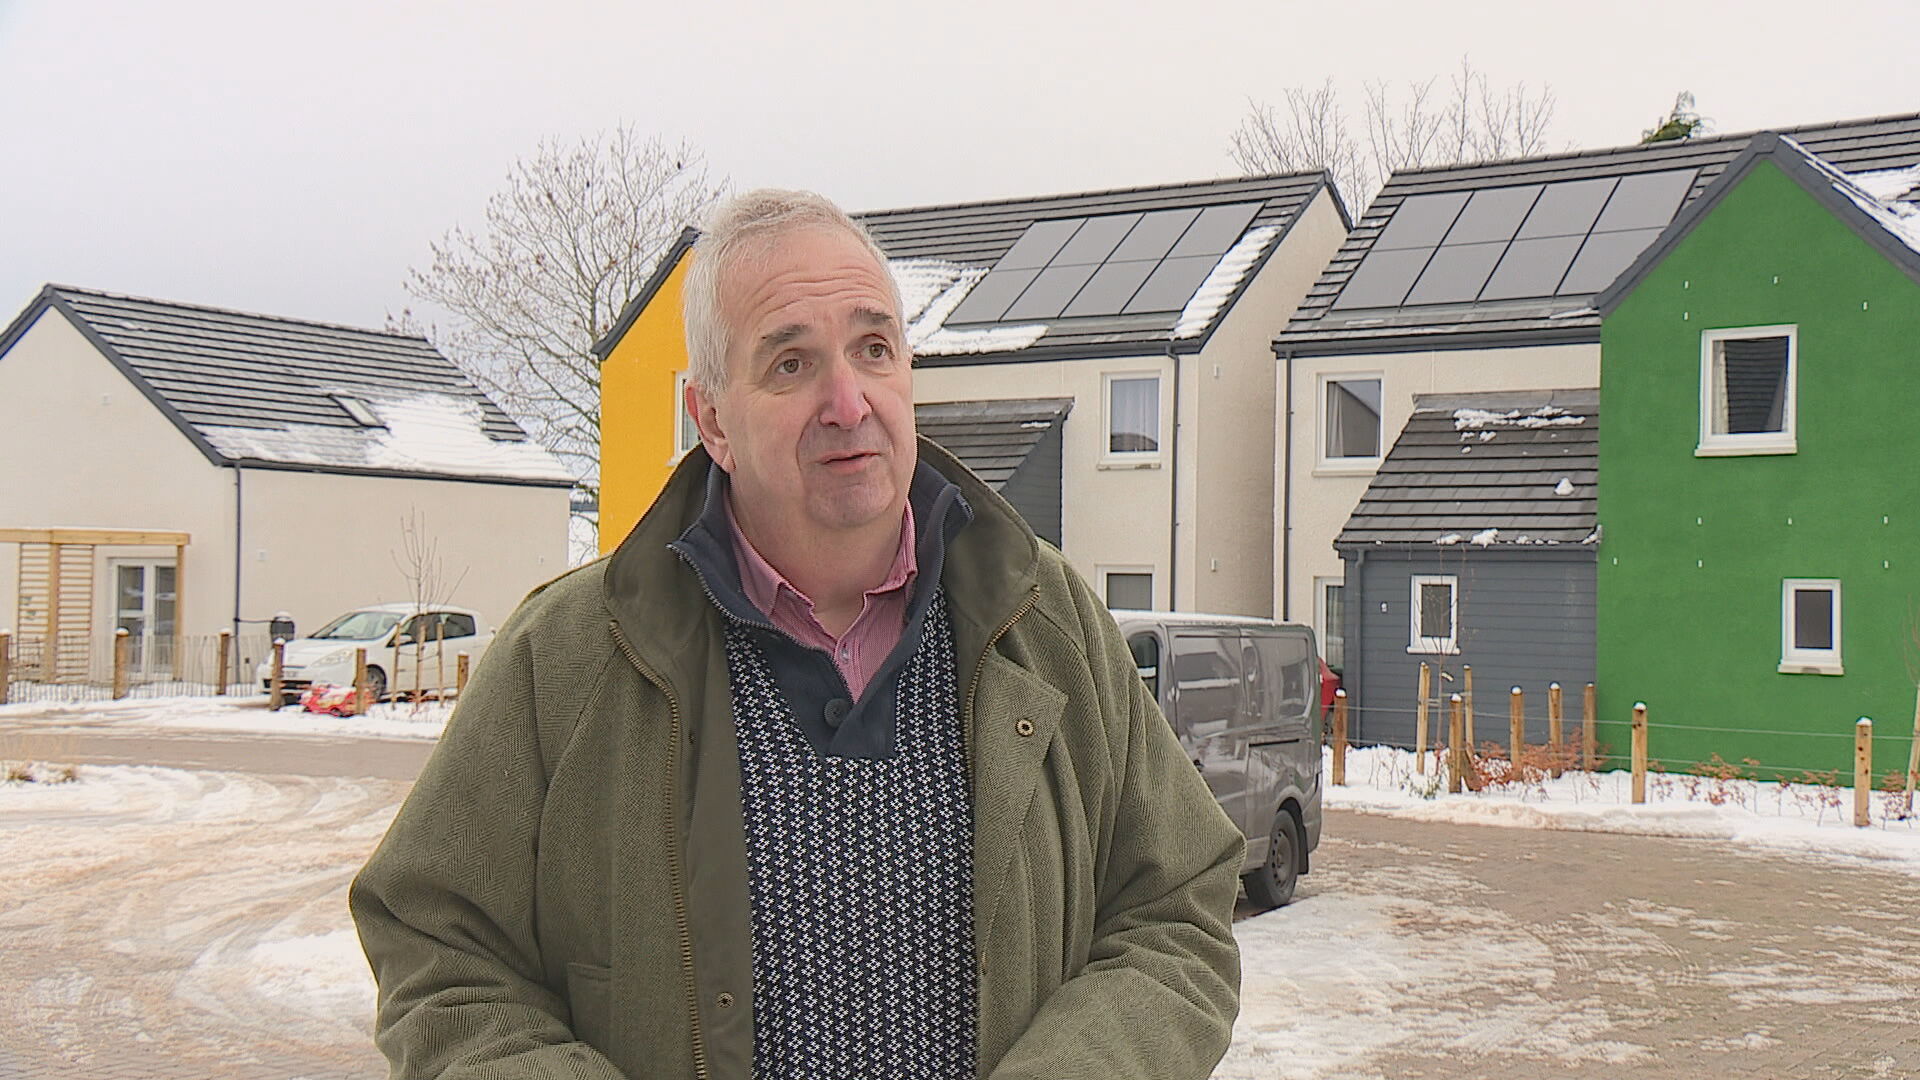 Dru McPherson said bills families have been 'put in fuel poverty' through no fault of their own